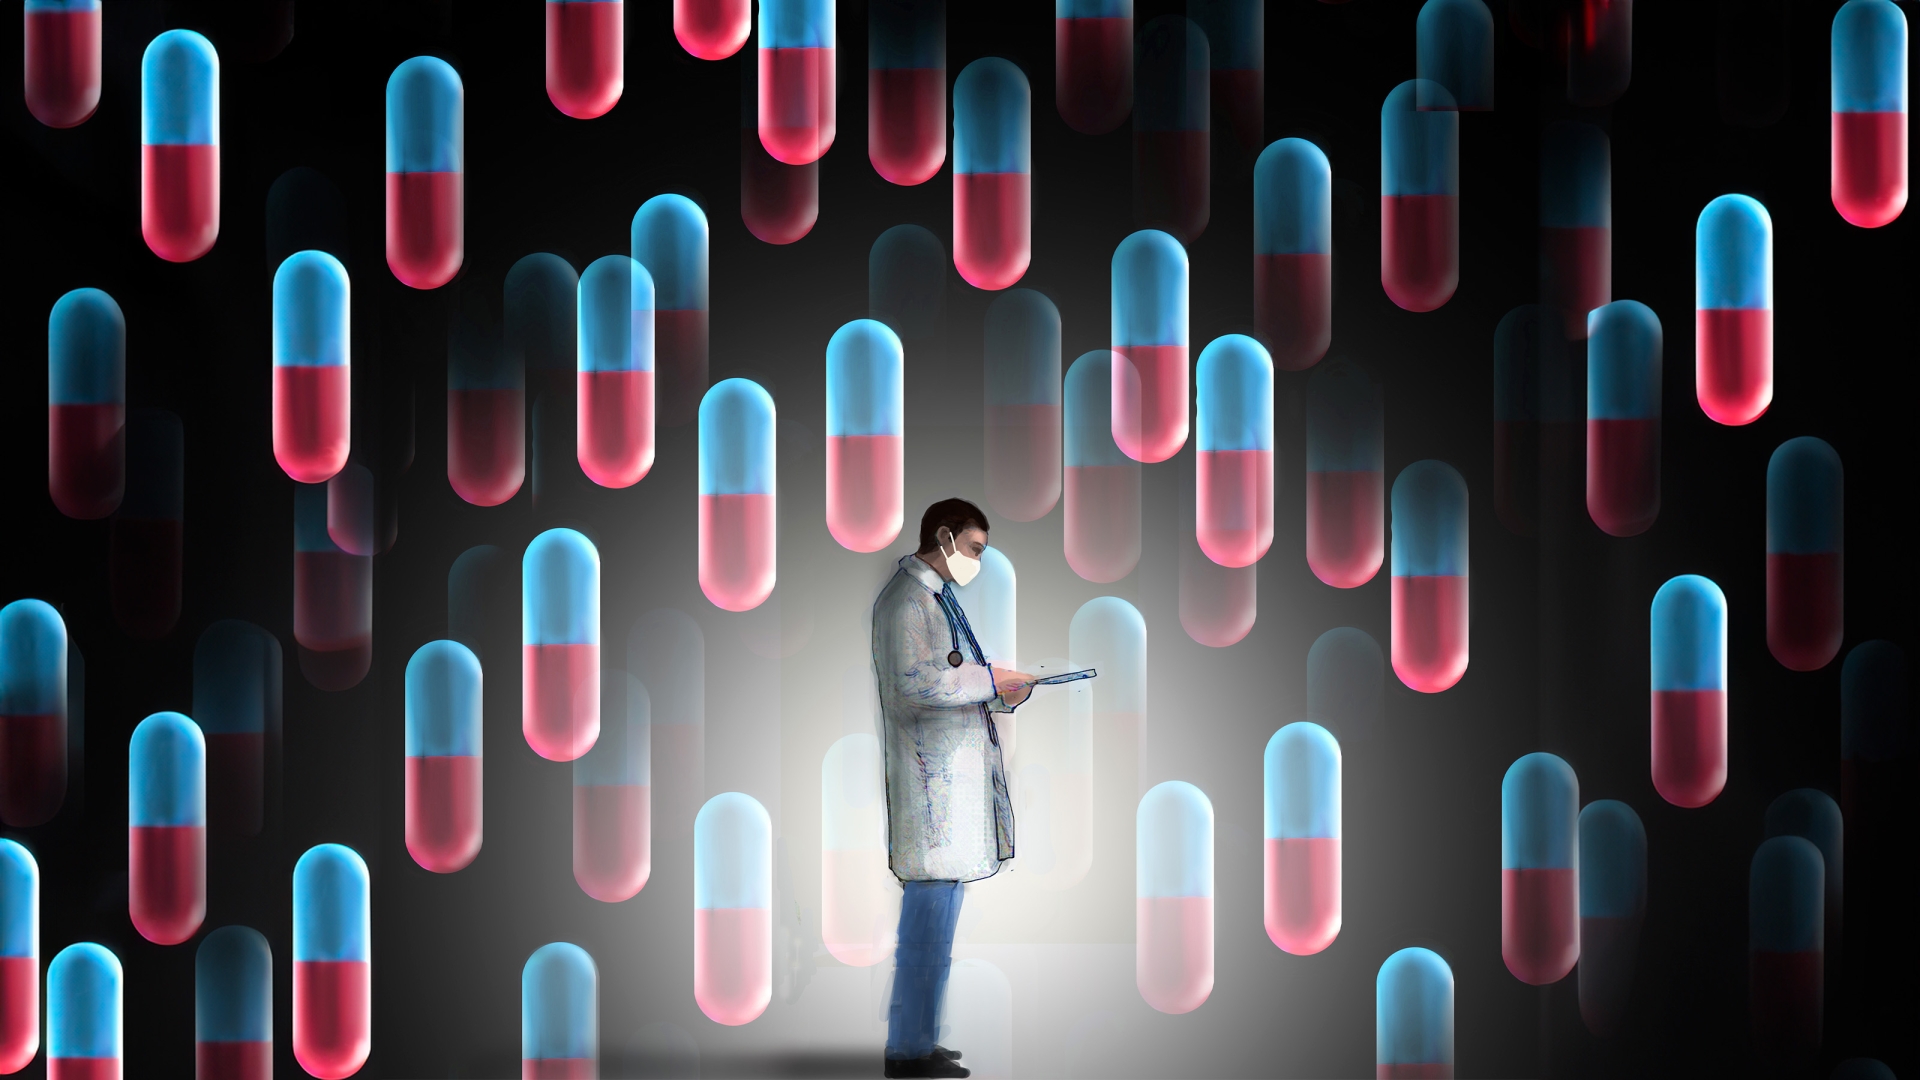 pills floating blue pink dark background physician in middle looking at chart white coat scrubs